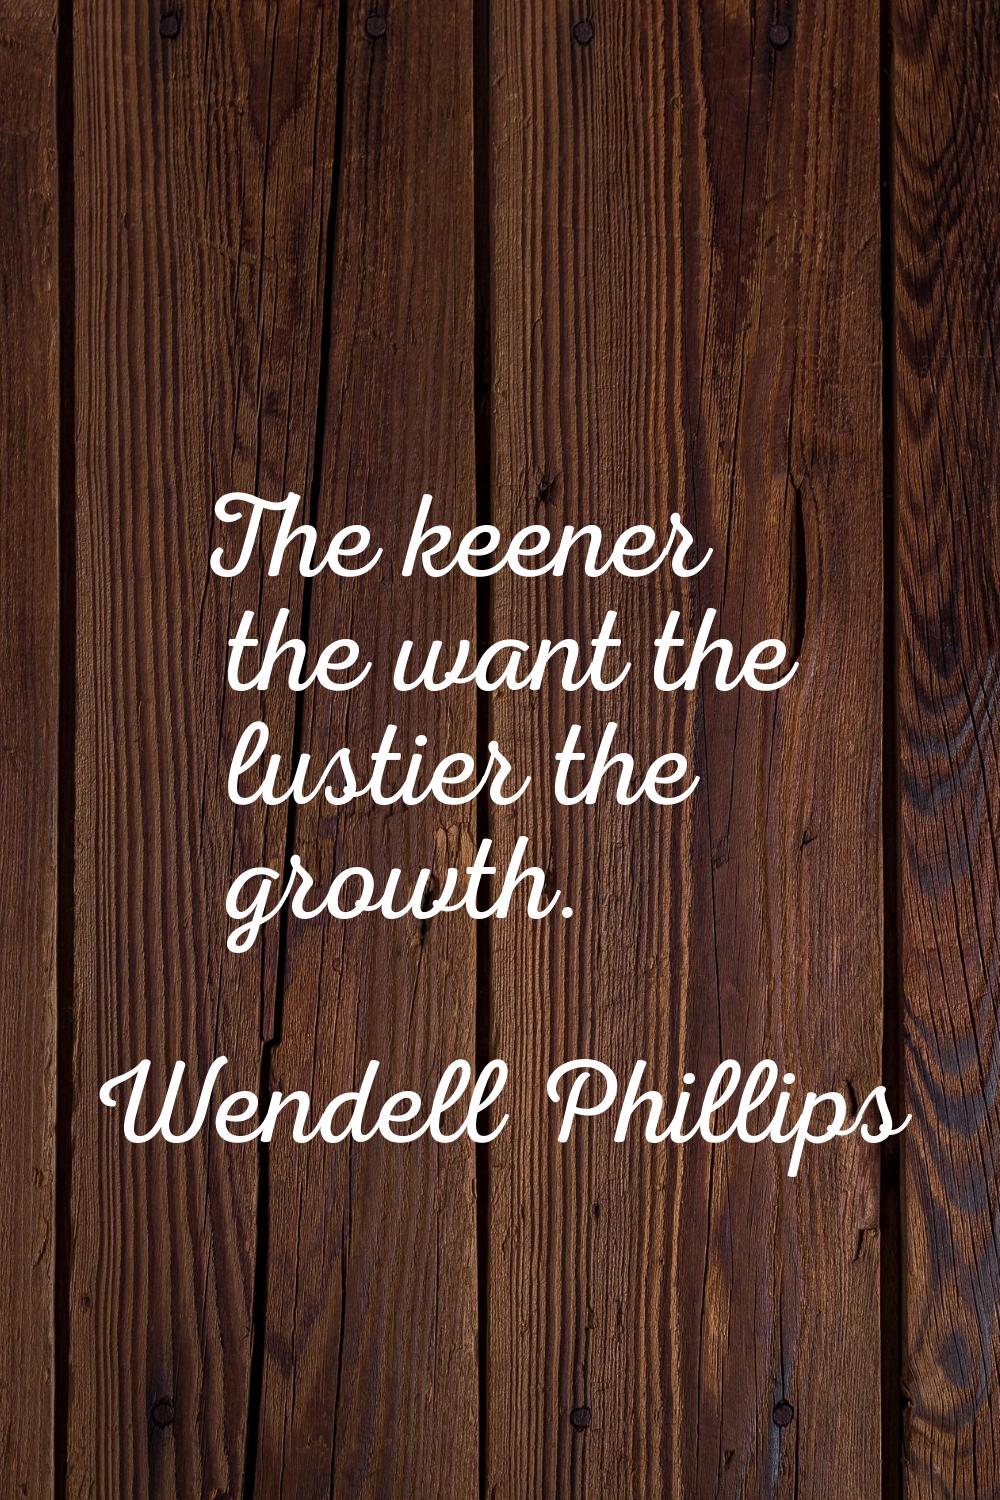 The keener the want the lustier the growth.